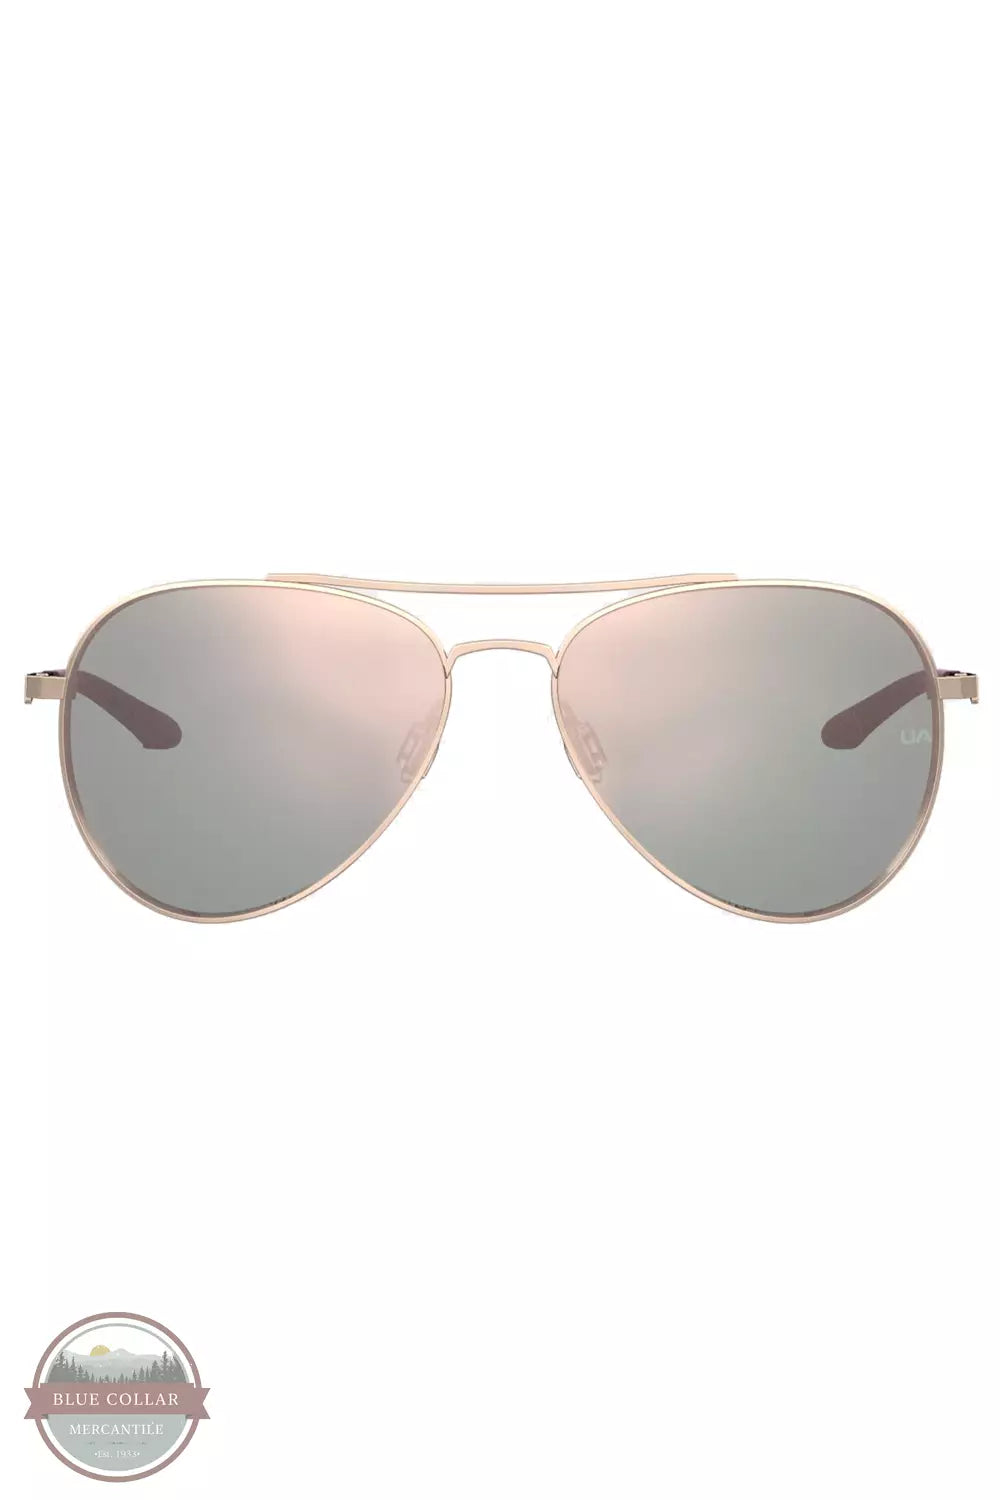 Under Armour 1368758-900 Instinct Mirror Sunglasses in Rose Gold Front View